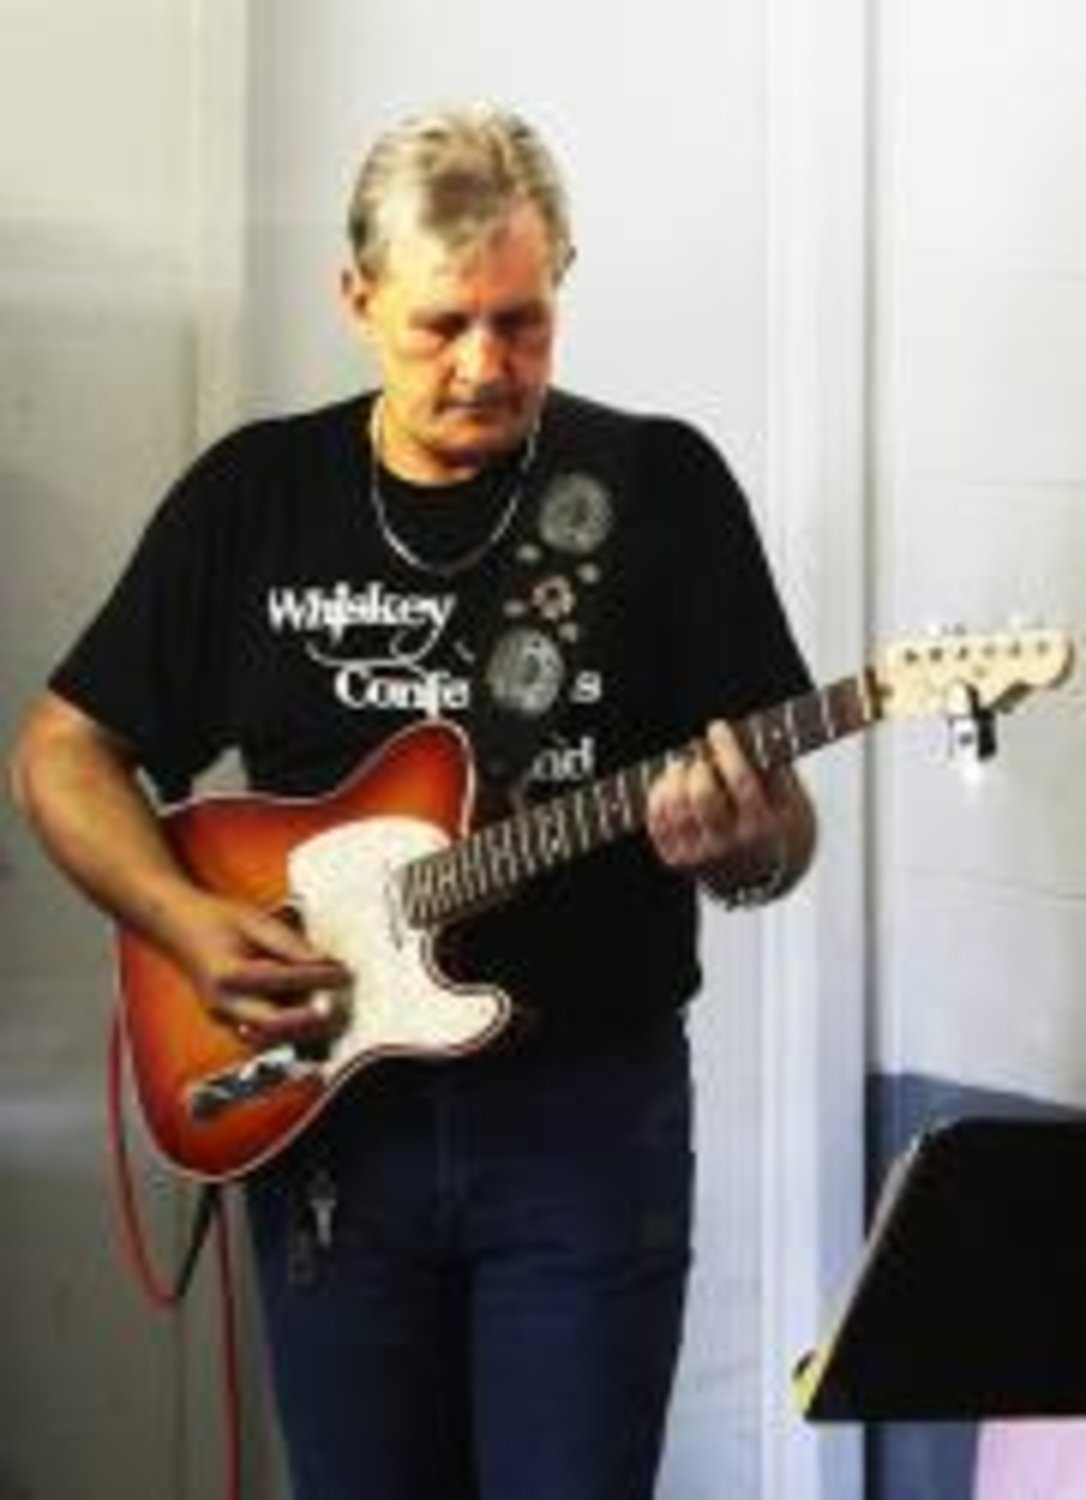 Don Bosco, the newest member of Whiskey Confessions Band, has played lead guitar with many artists throughout his long career. He joined WCB about two months ago.